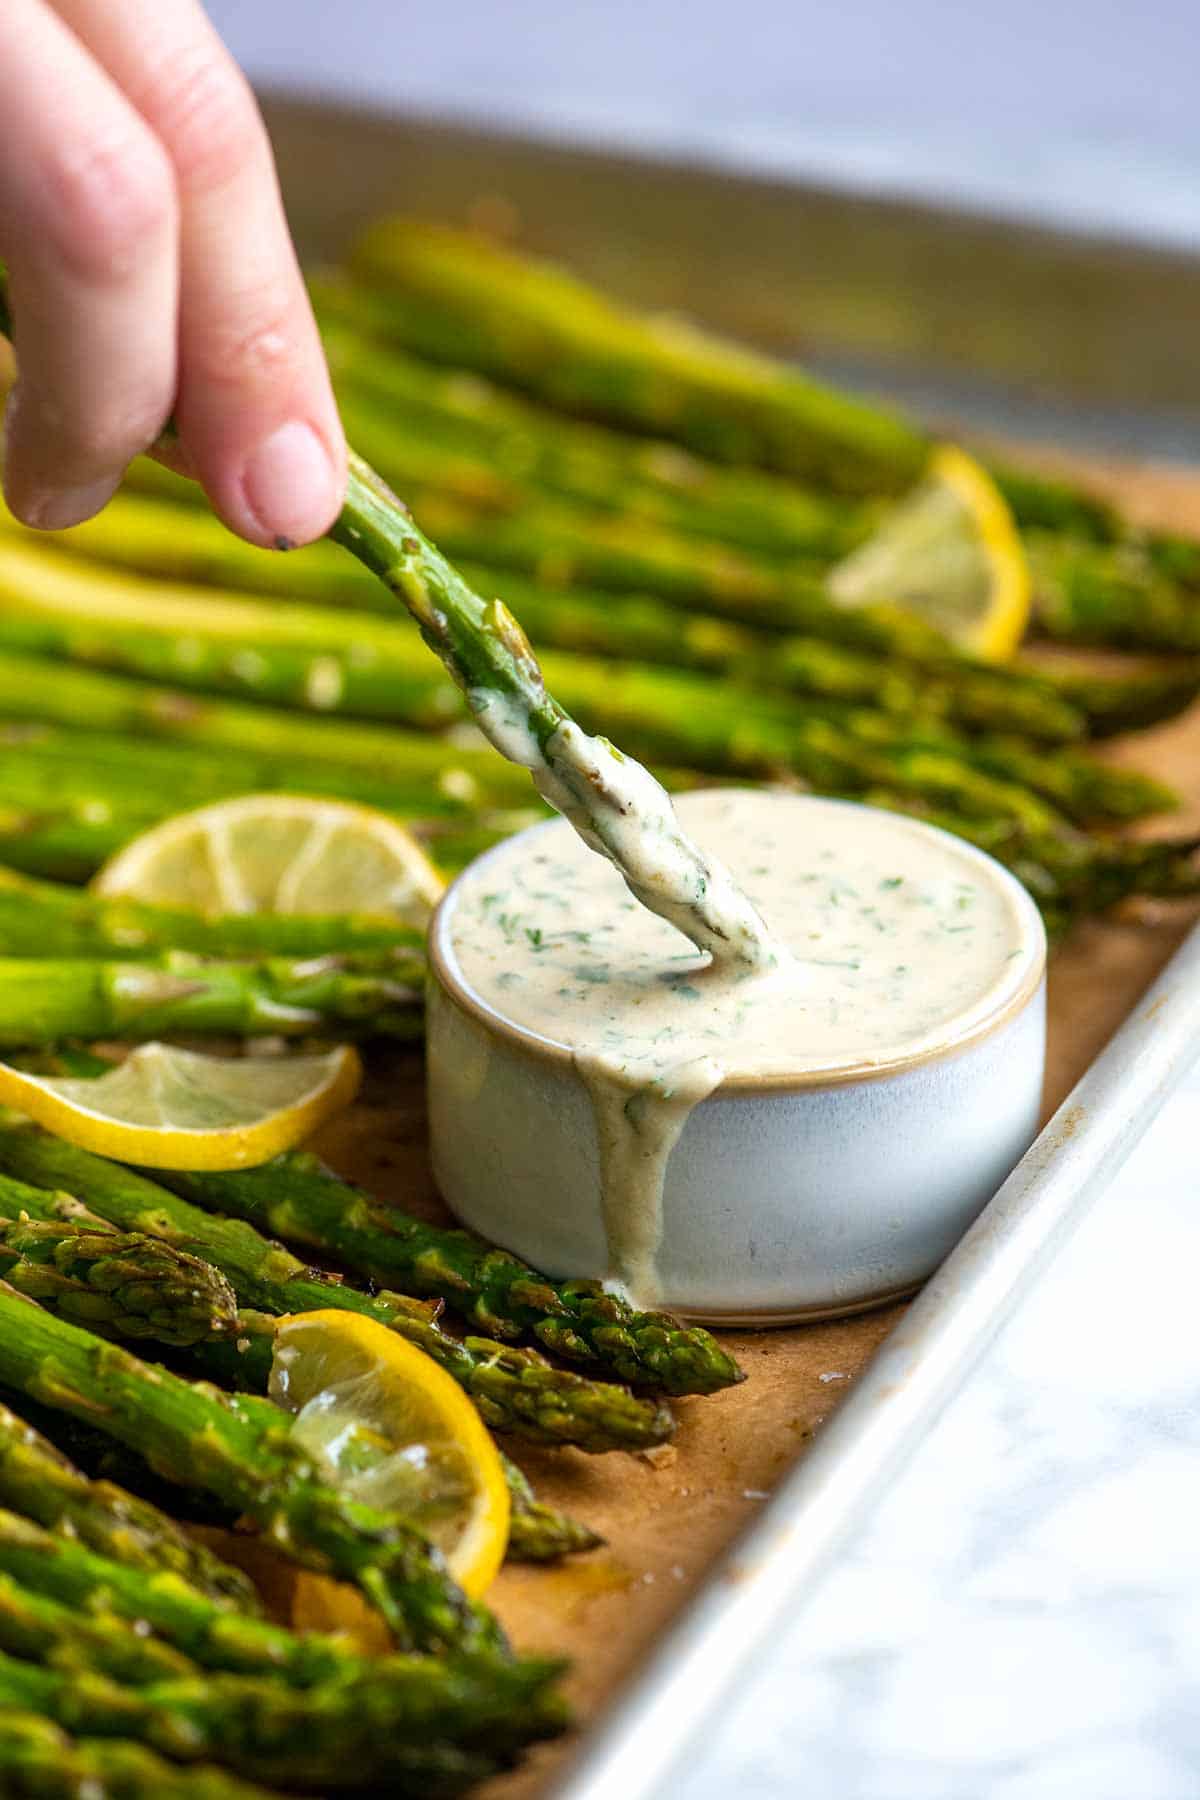 This roasted asparagus is a simple, fast side dish. The asparagus is perfectly tender with slightly crispy tips.  Served with our five minute garlic herb sauce, it's deliciously garlicky, fresh, and vegetarian.